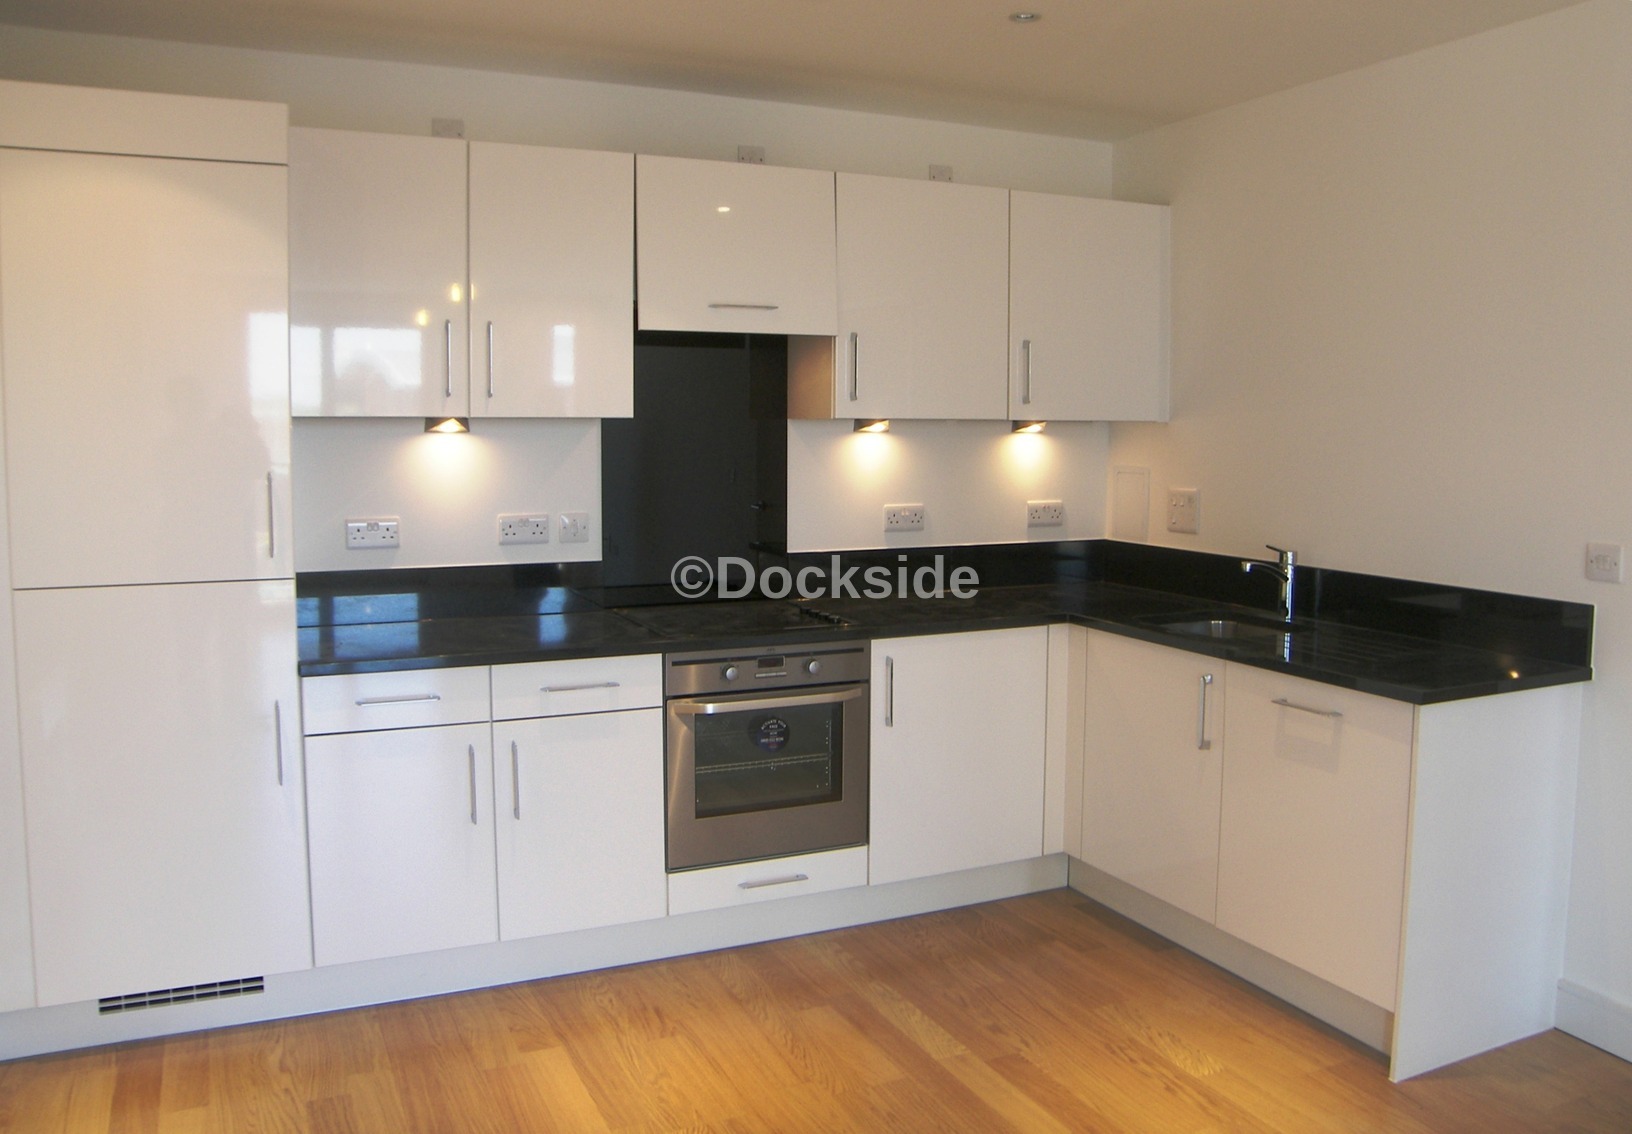 2 bed to rent in Dock Head Road, Chatham Maritime, ME4 